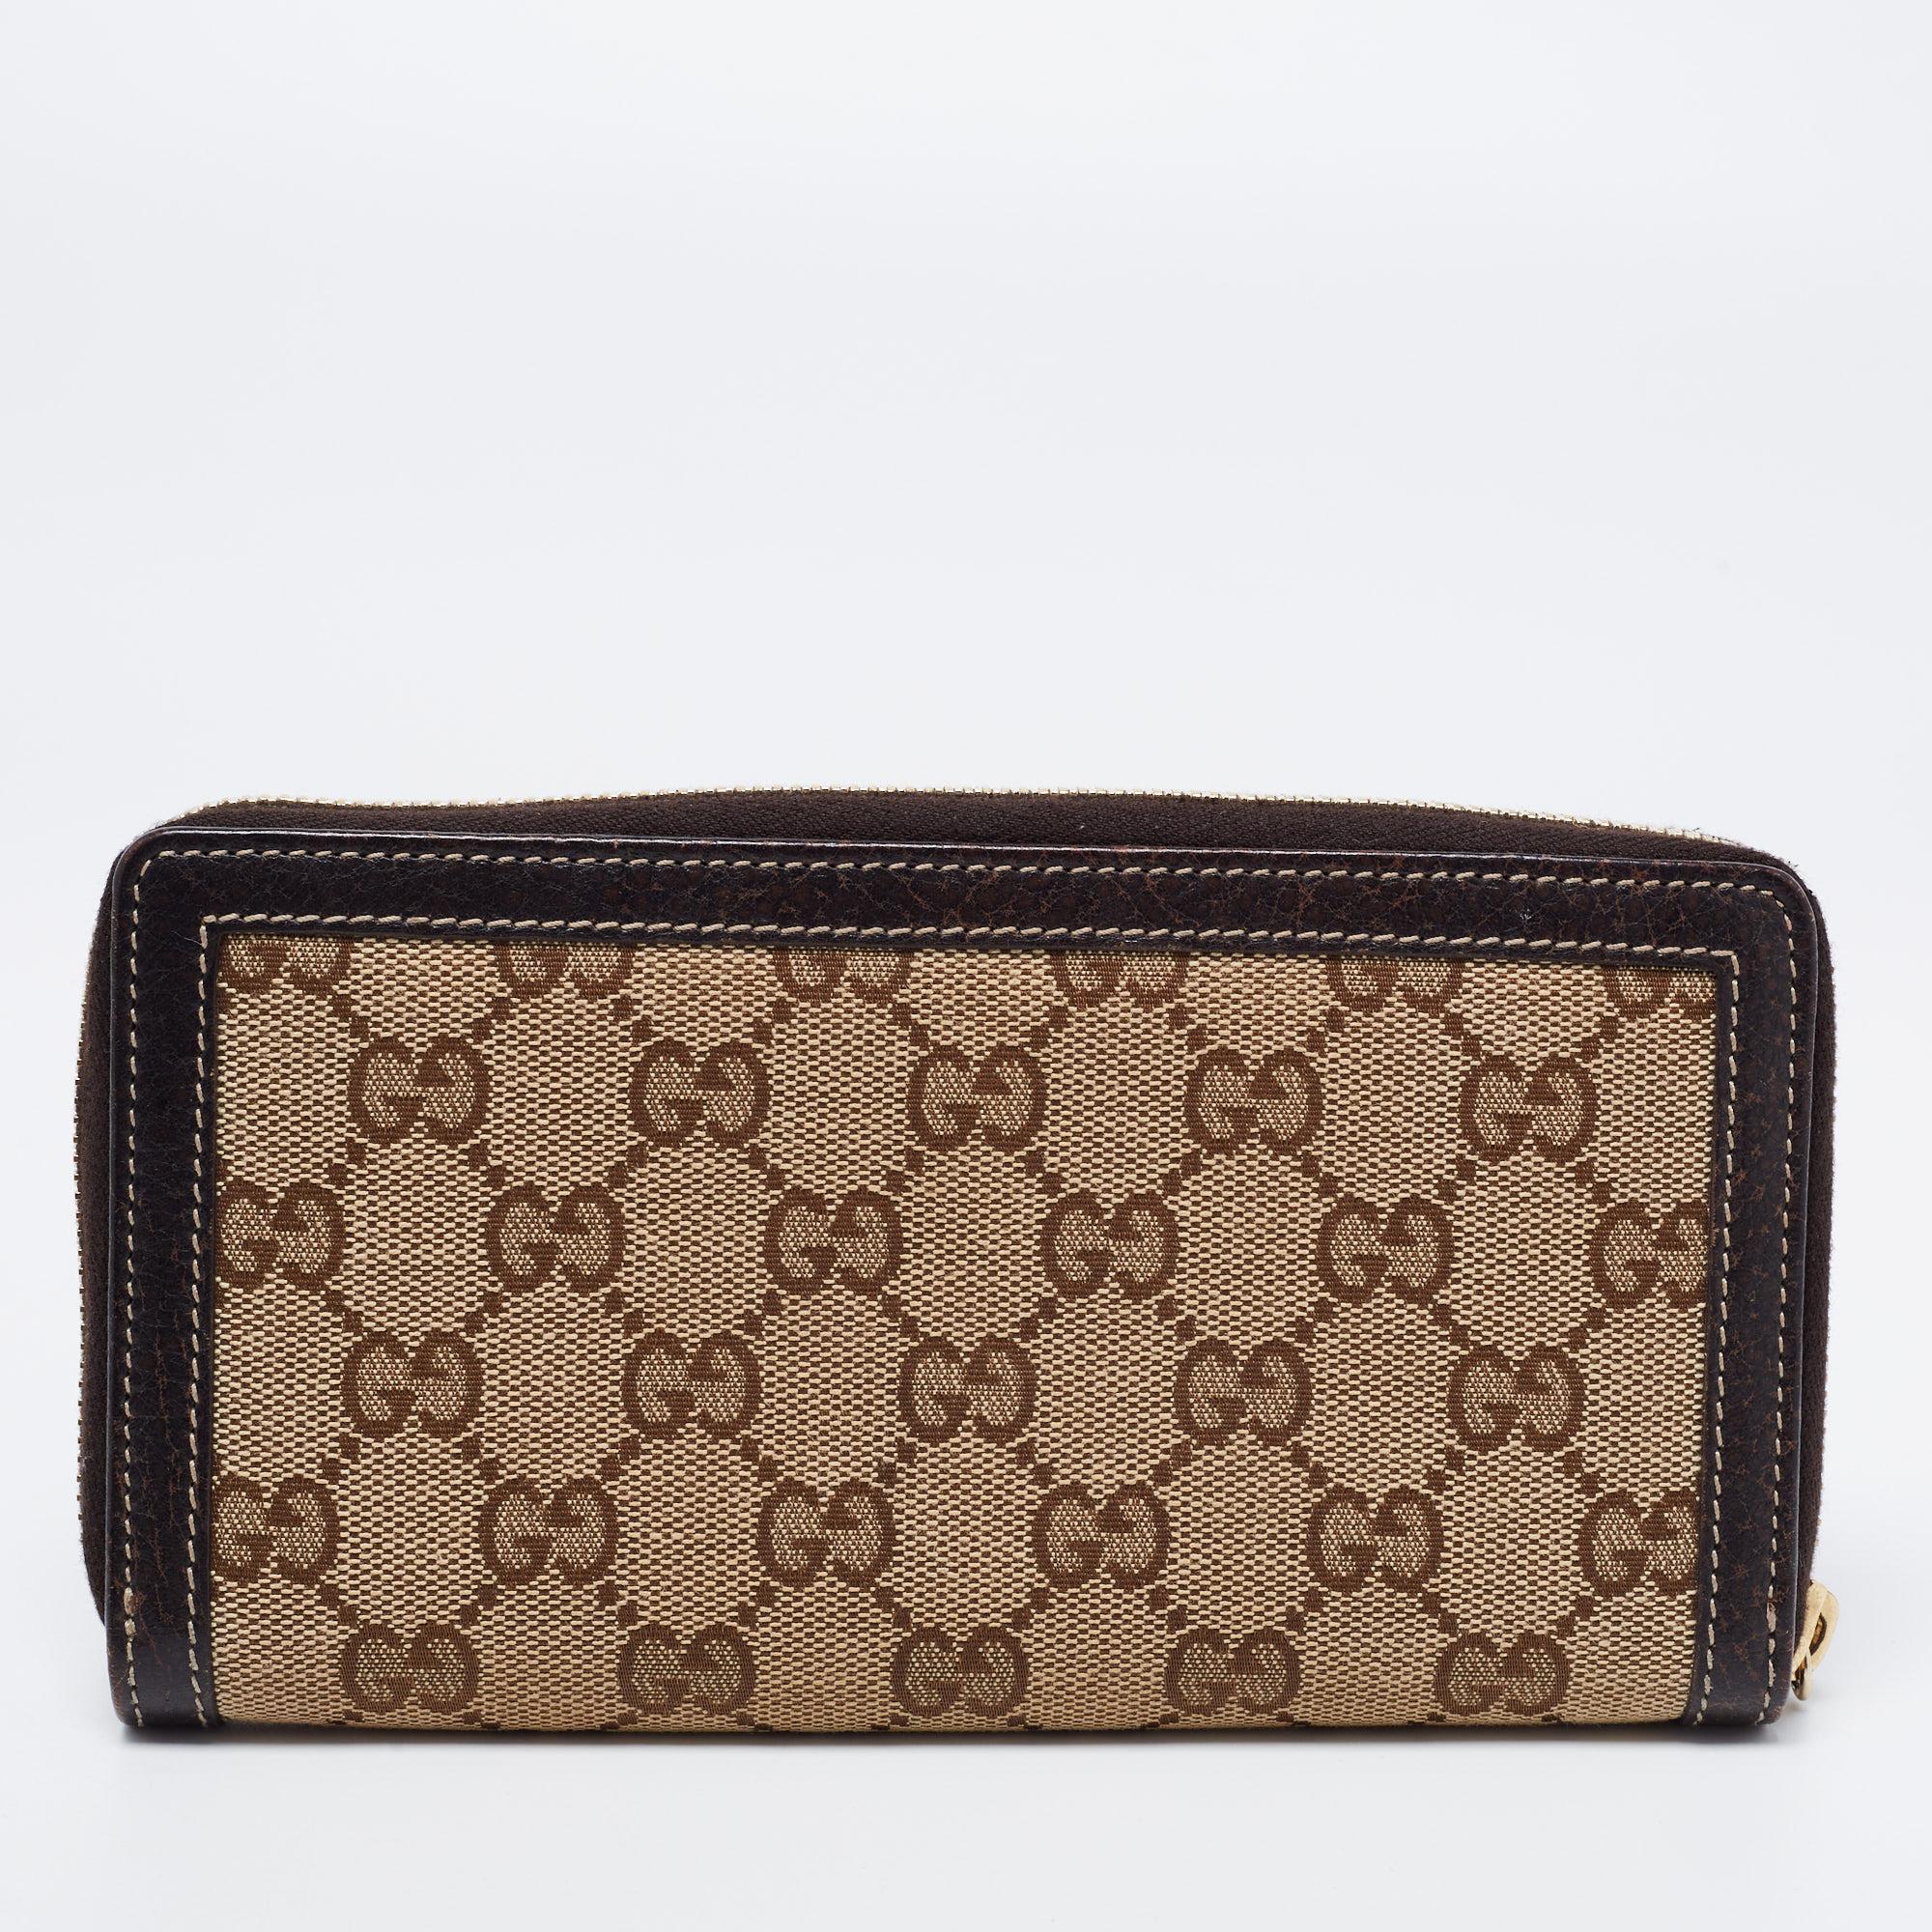 Get your hands on this stylish GG canvas and leather wallet accented with a bamboo tassel on the side. This Gucci creation has multiple card slots and a zipped pocket. It is designed in a zip-around style and is complete with gold-tone hardware.

